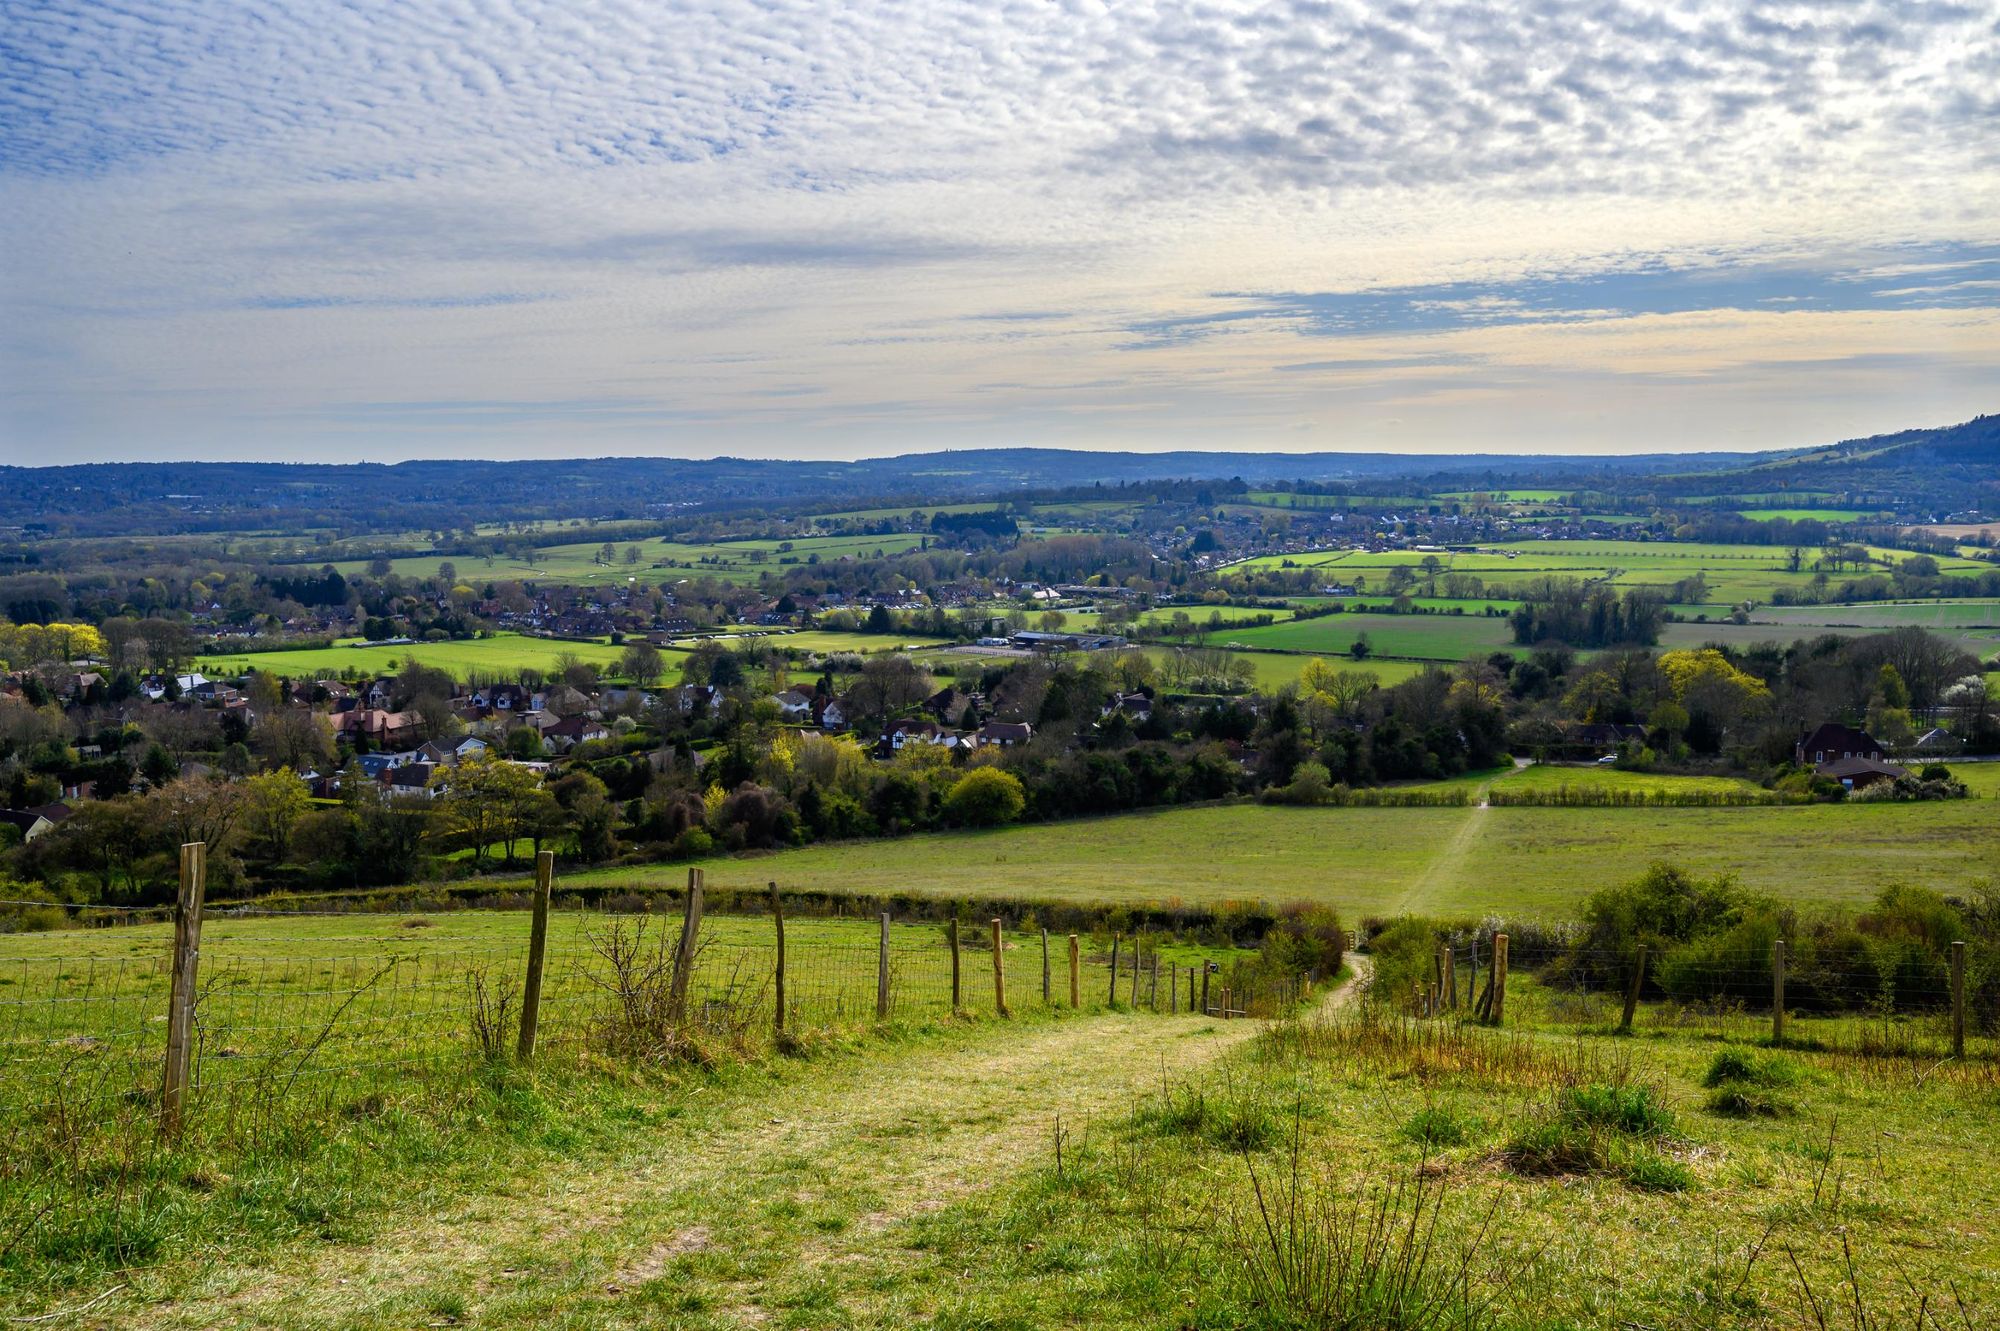 An example of the kinds of paths and scenery you'll see in the Kent Downs AONB. Photo: Getty